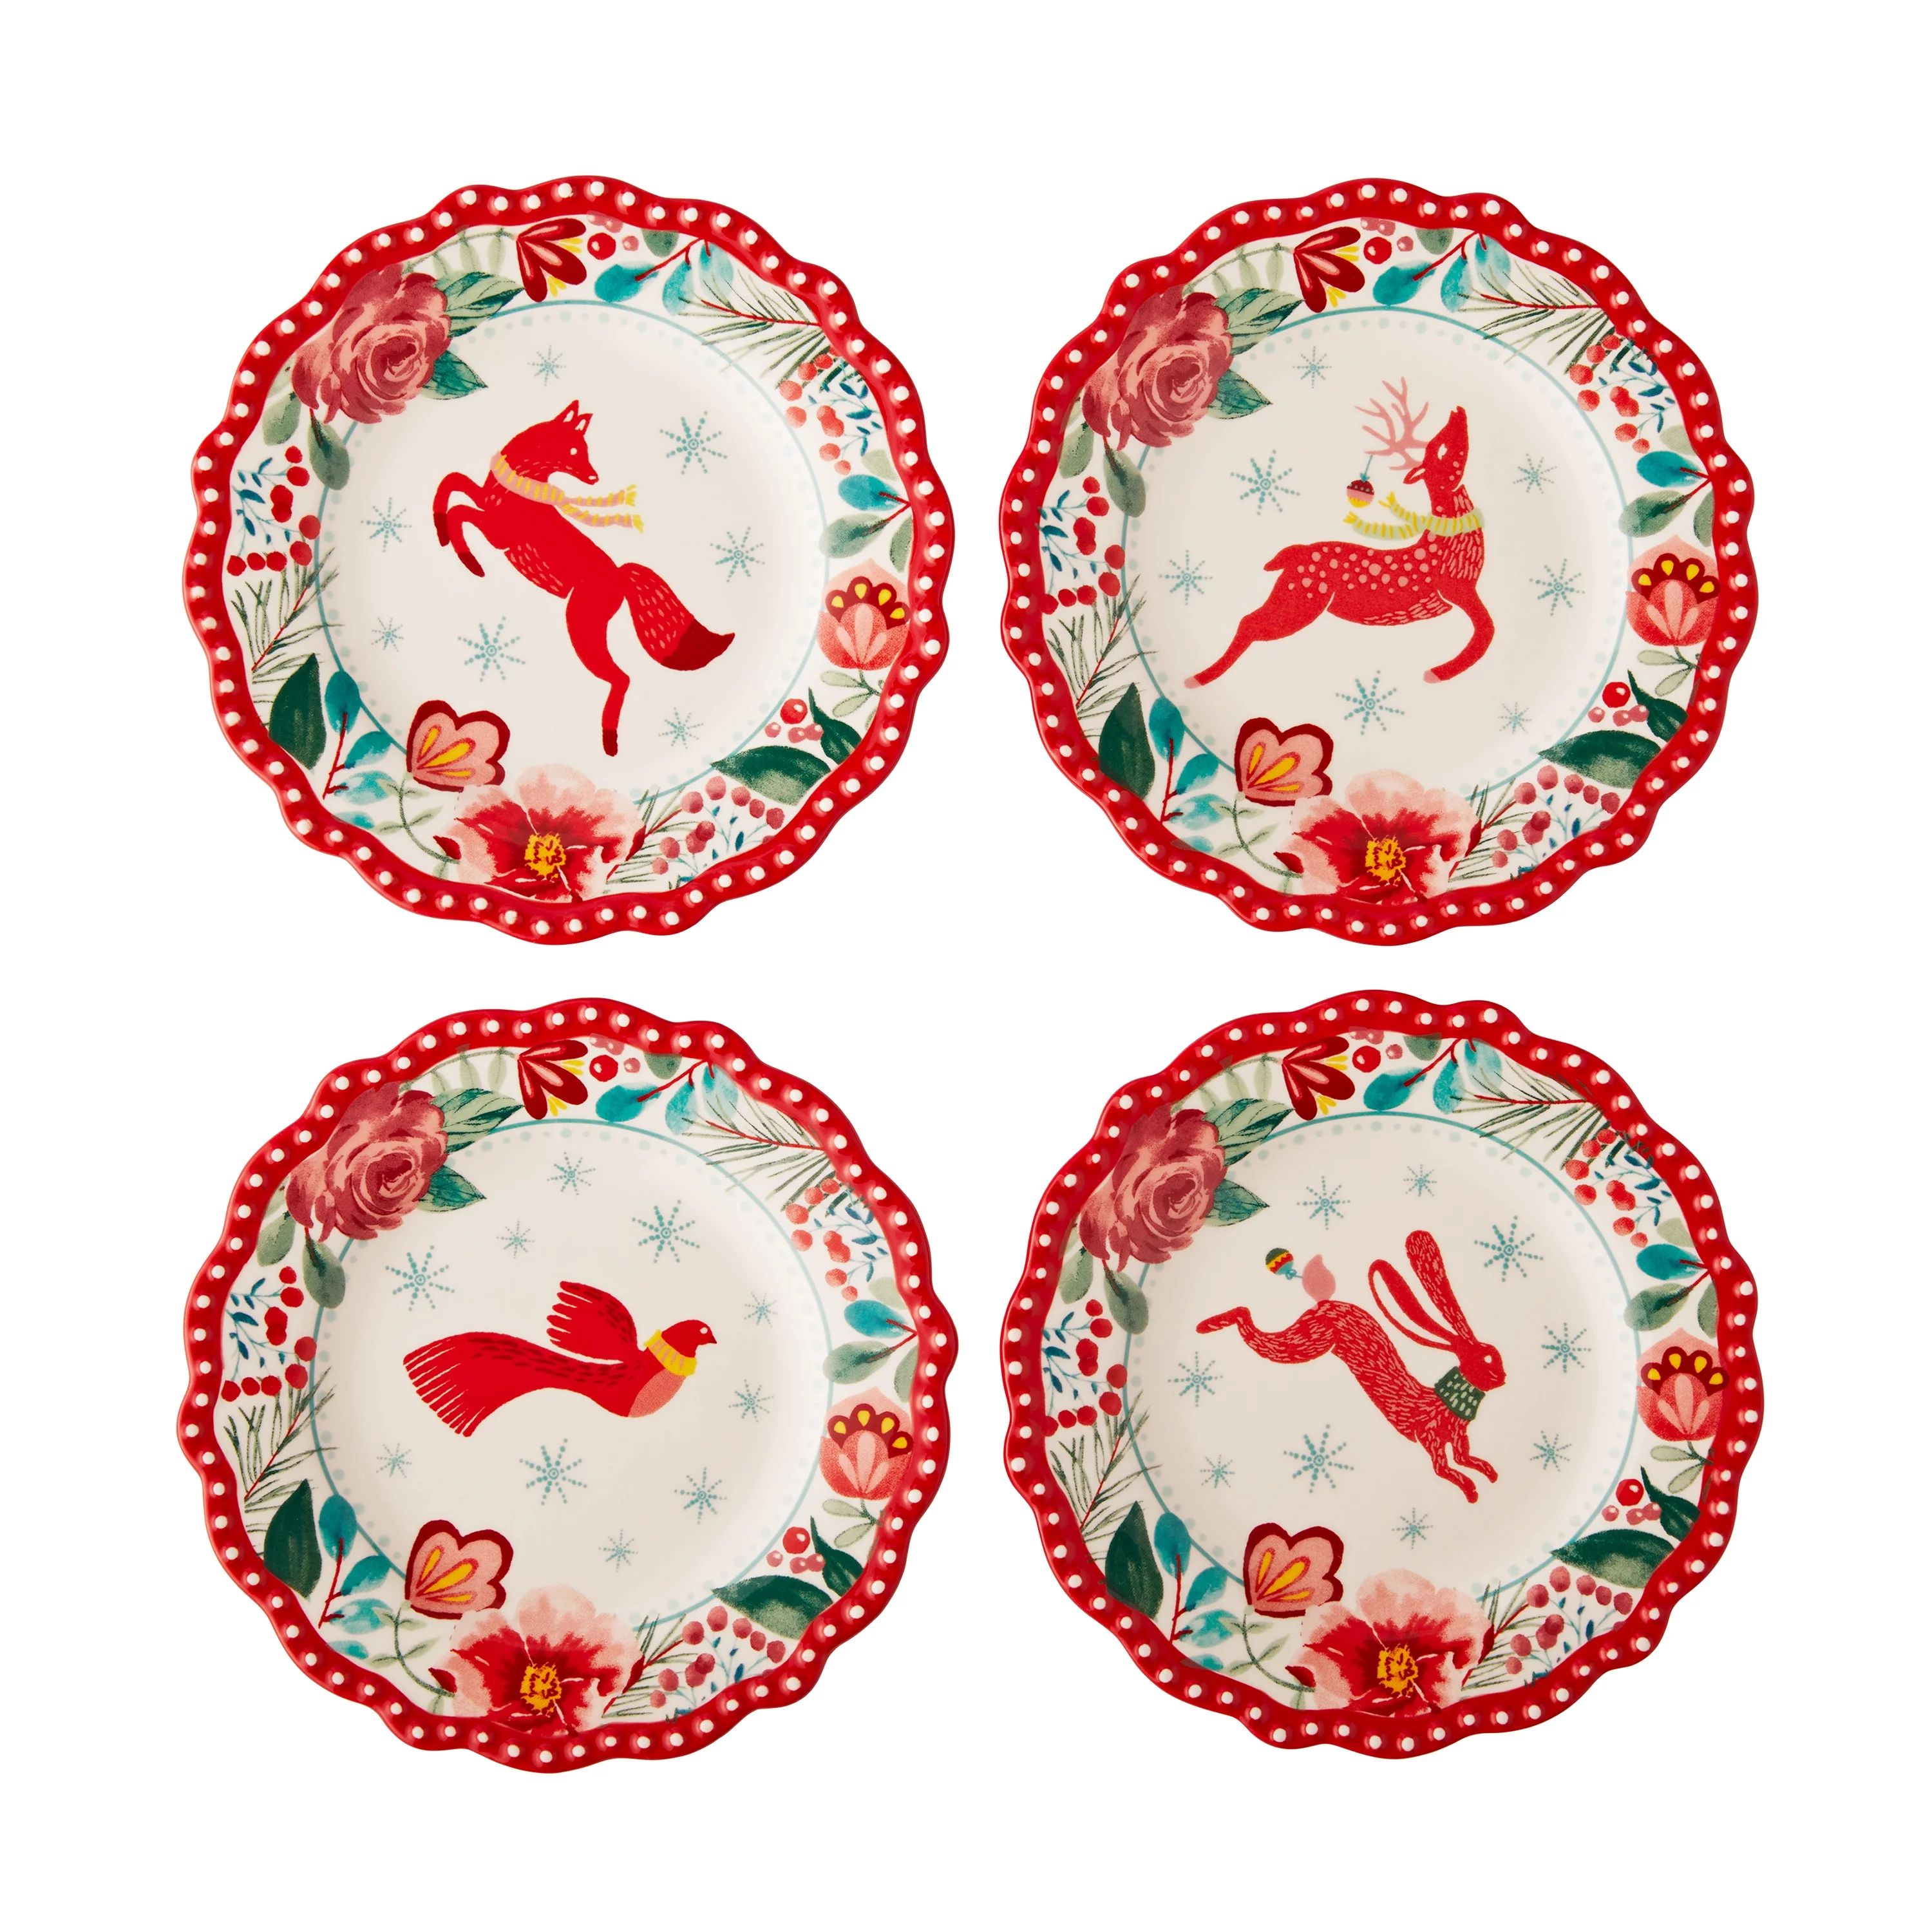 The Pioneer Woman Festive Forest Set of 4 Round Stoneware Appetizer Plates | Walmart (US)